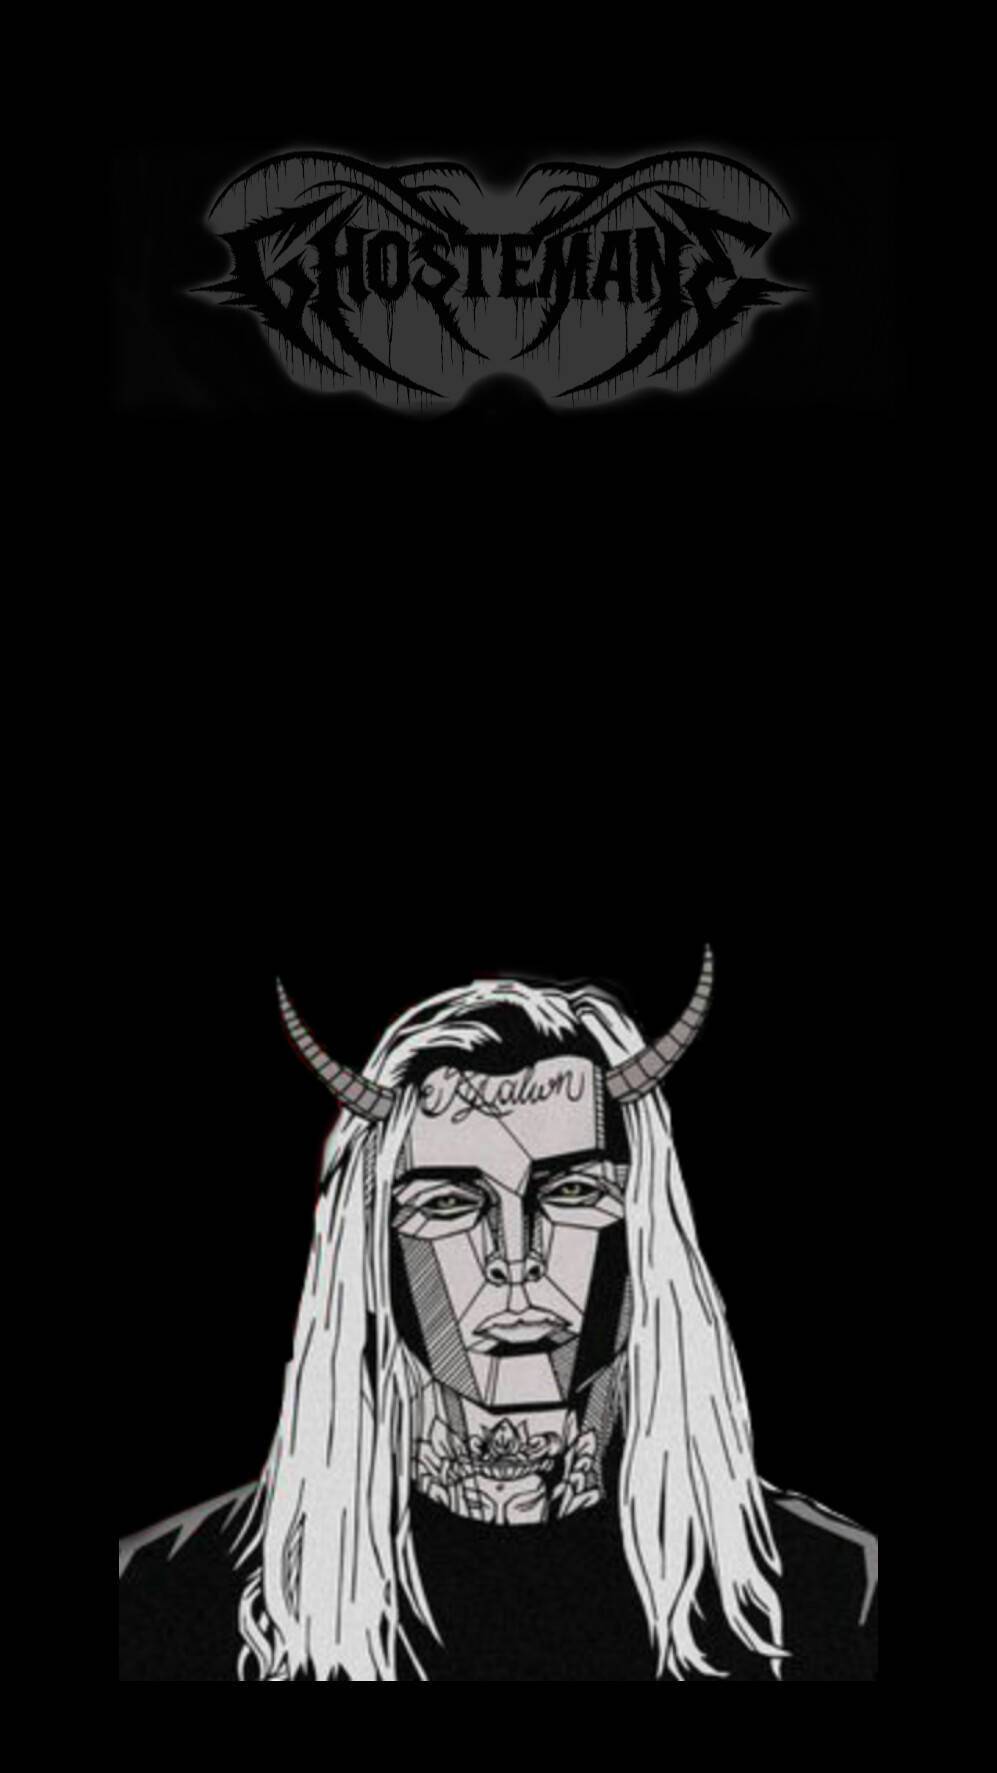 Greyscale Ghostemane Low Poly Art Background